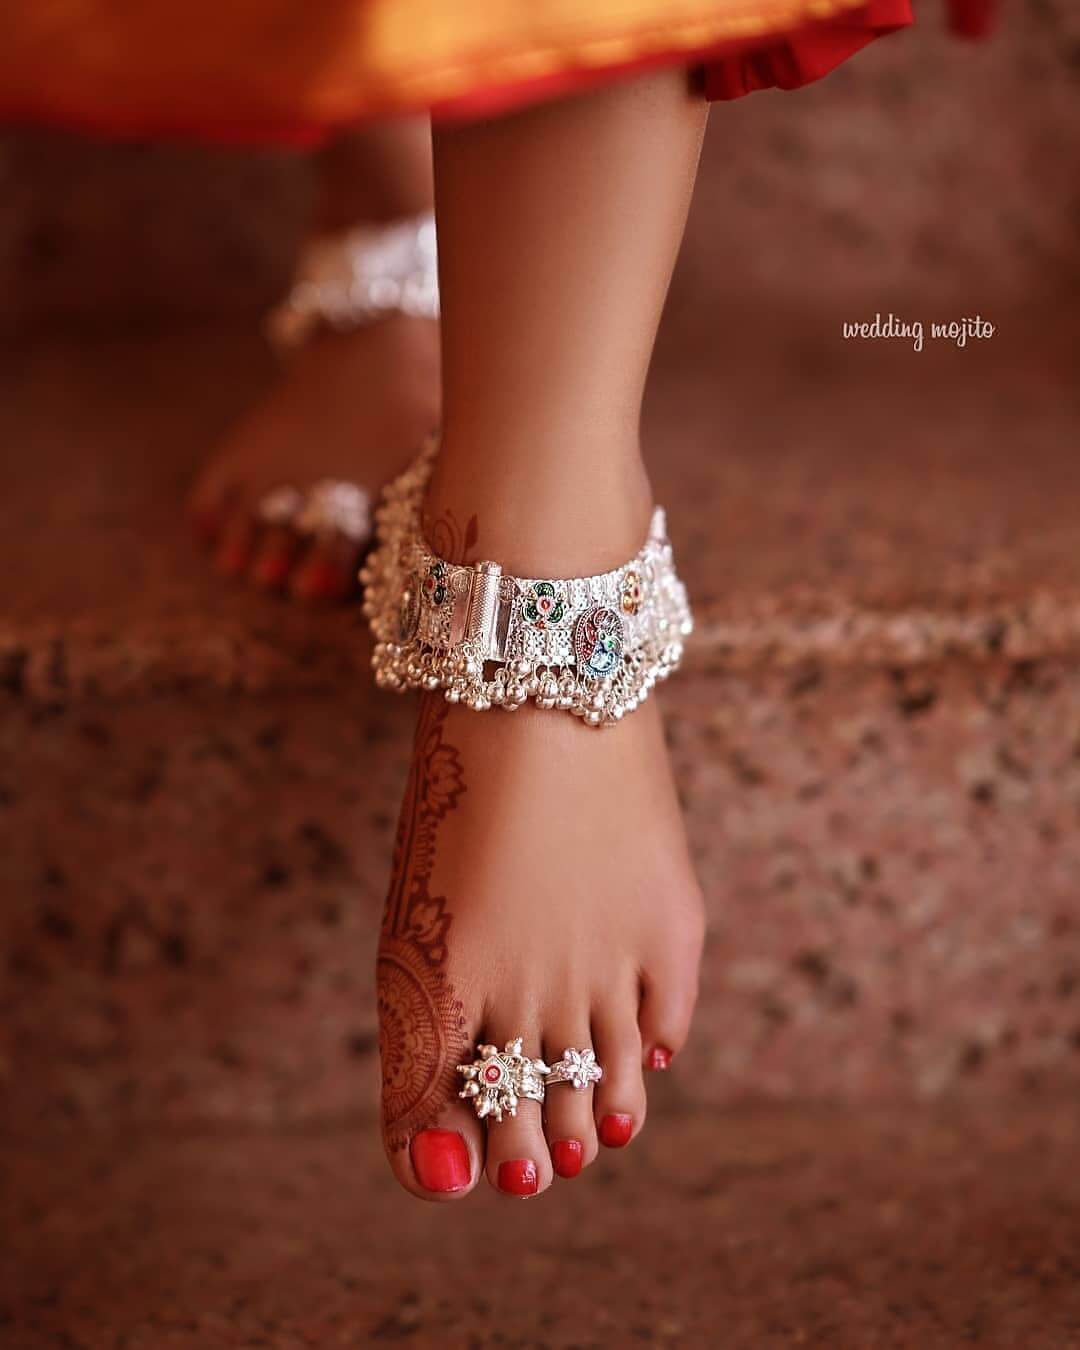 Bright Silver Segmented Silver Anklets With Ghungroo